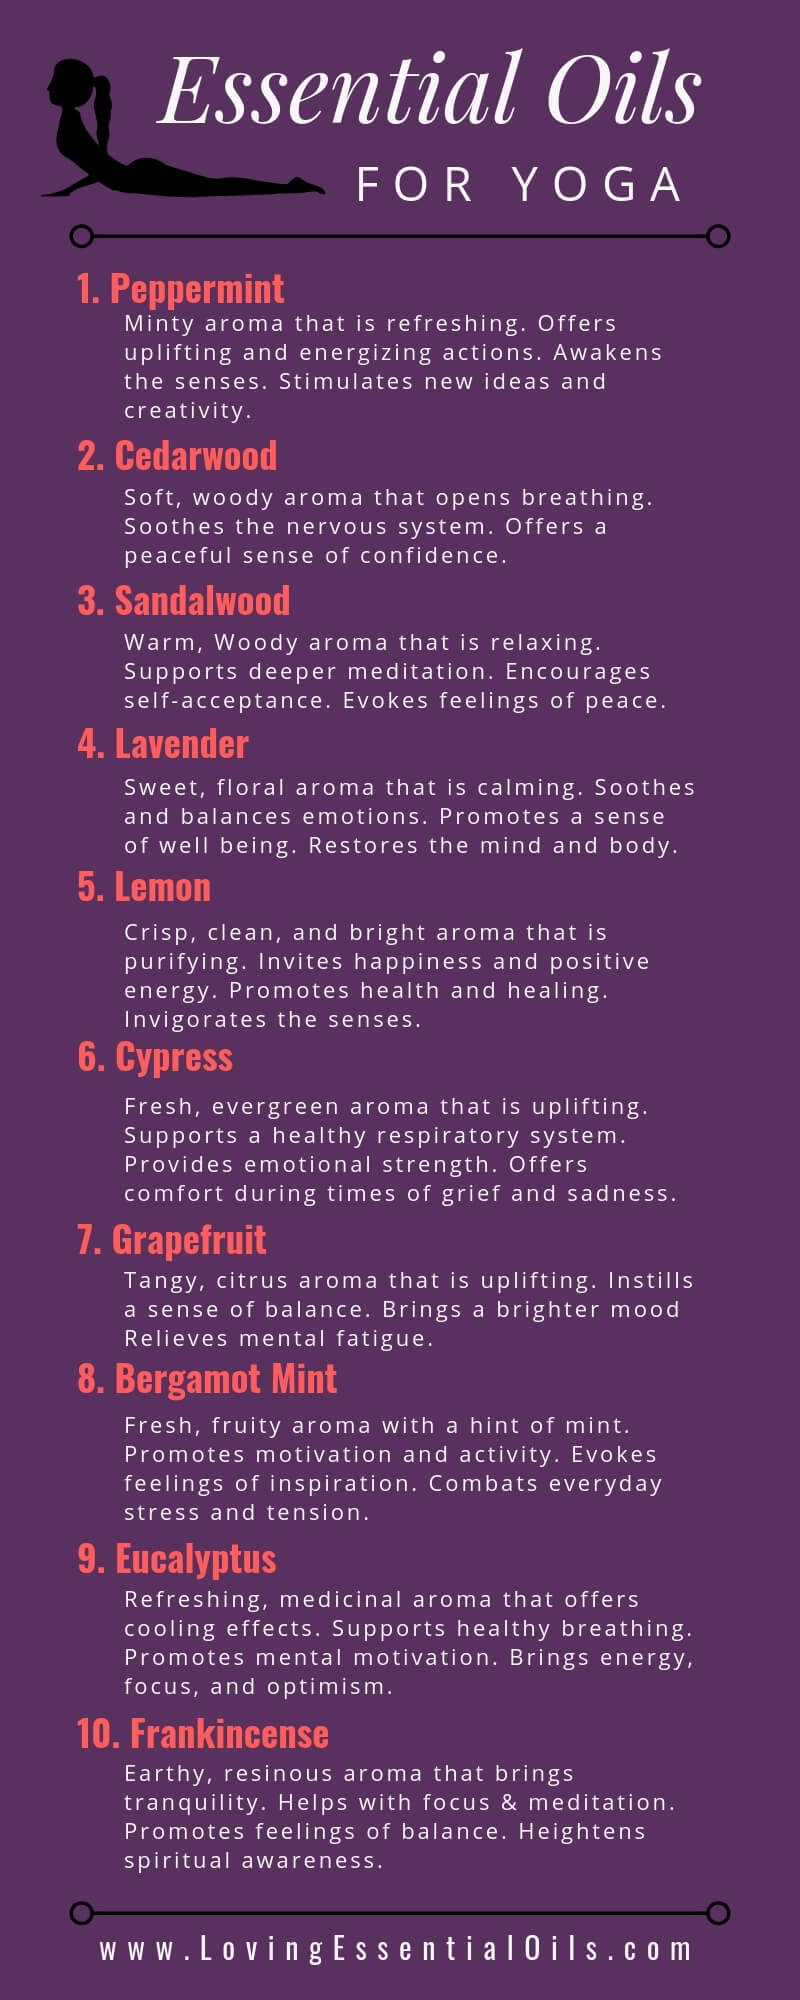 Essential oils for yoga pinterest image by loving essential oils